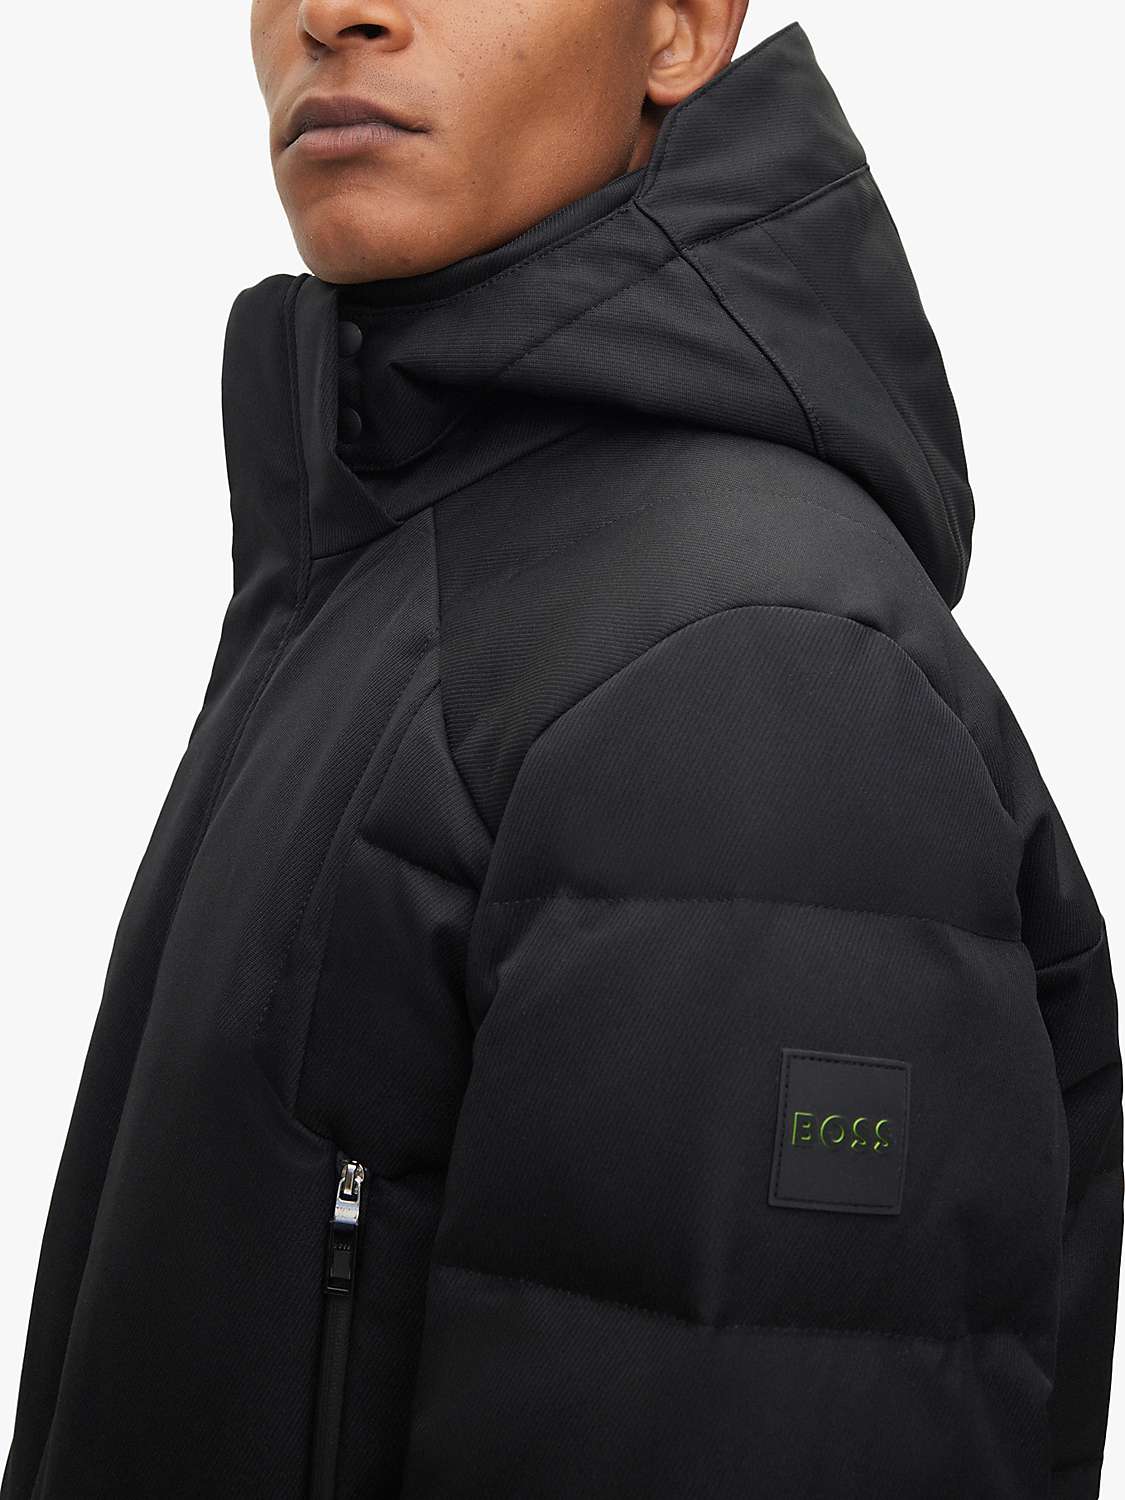 Buy BOSS Zorn Hooded Quilted Jacket, Black Online at johnlewis.com